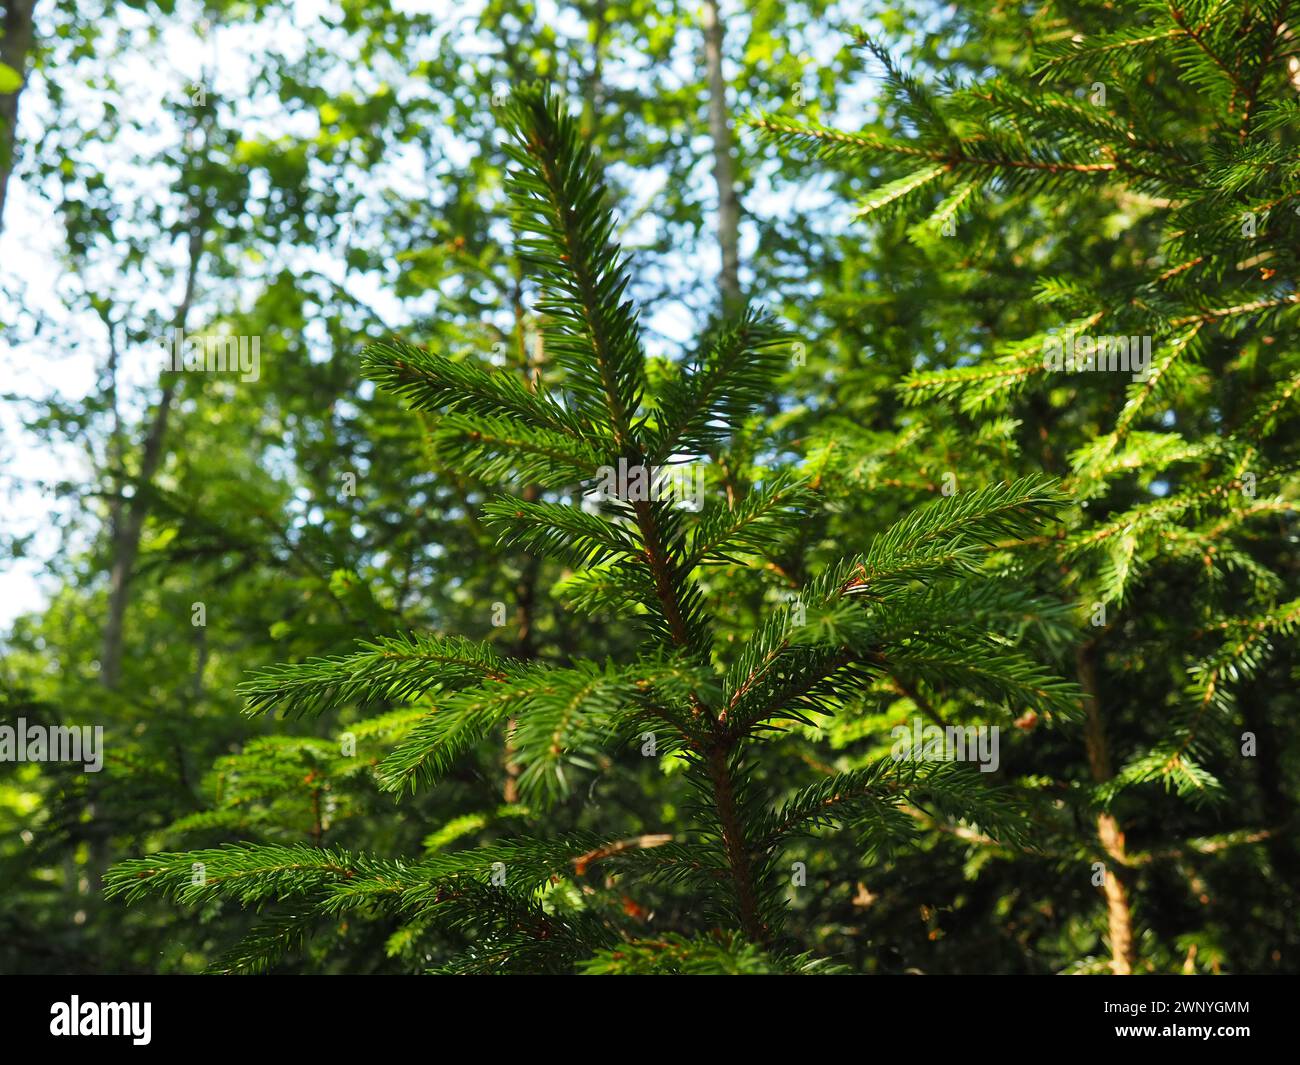 Picea spruce, a genus of coniferous evergreen trees in the pine family Pinaceae. Coniferous forest in Karelia. Spruce branches and needles. The Stock Photo